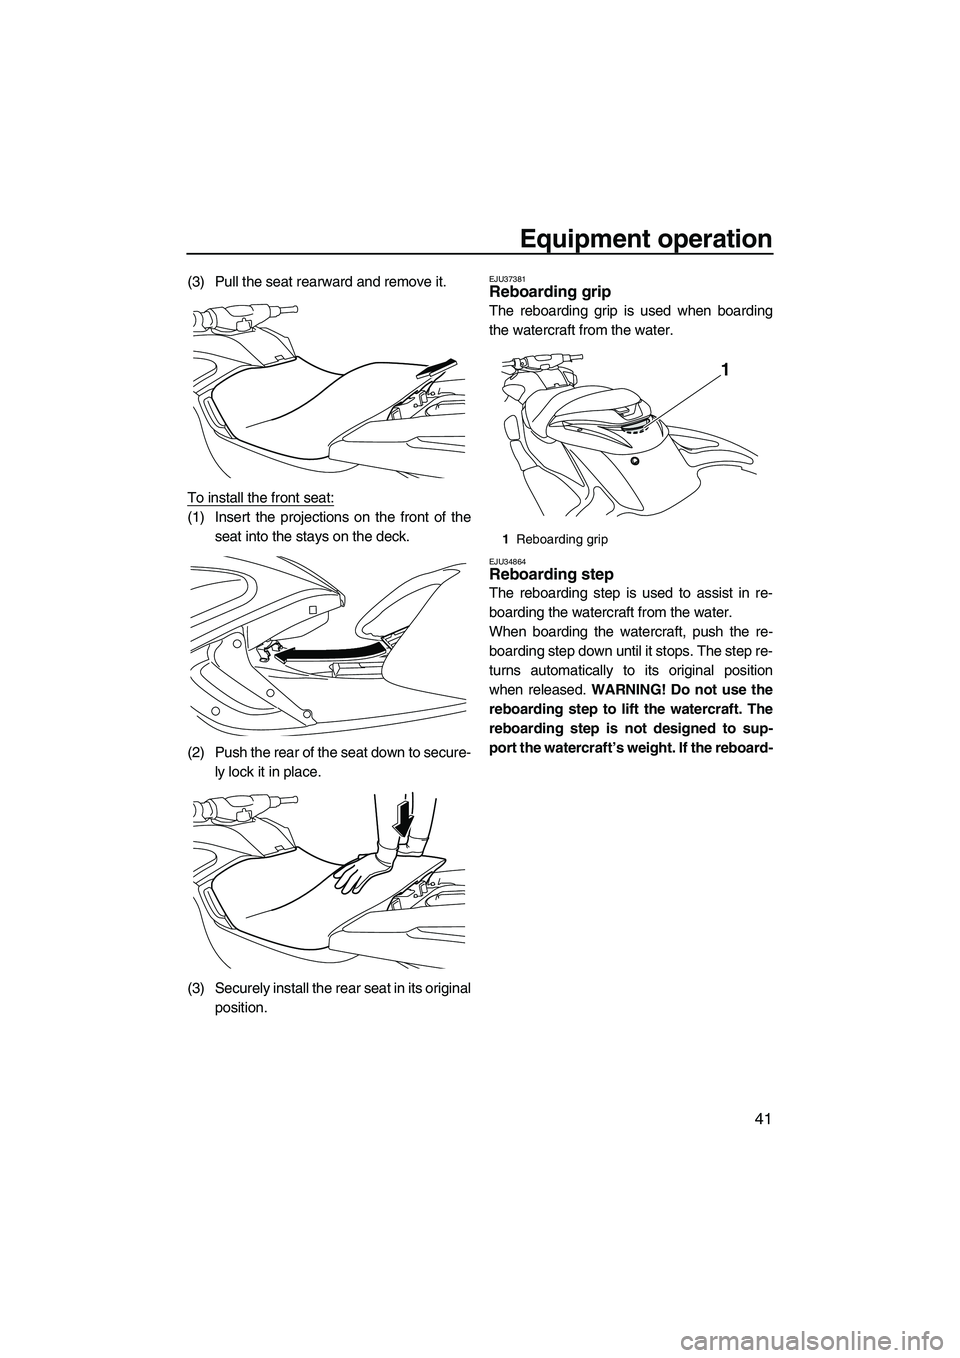 YAMAHA FZR 2012  Owners Manual Equipment operation
41
(3) Pull the seat rearward and remove it.
To install the front seat:
(1) Insert the projections on the front of the
seat into the stays on the deck.
(2) Push the rear of the sea